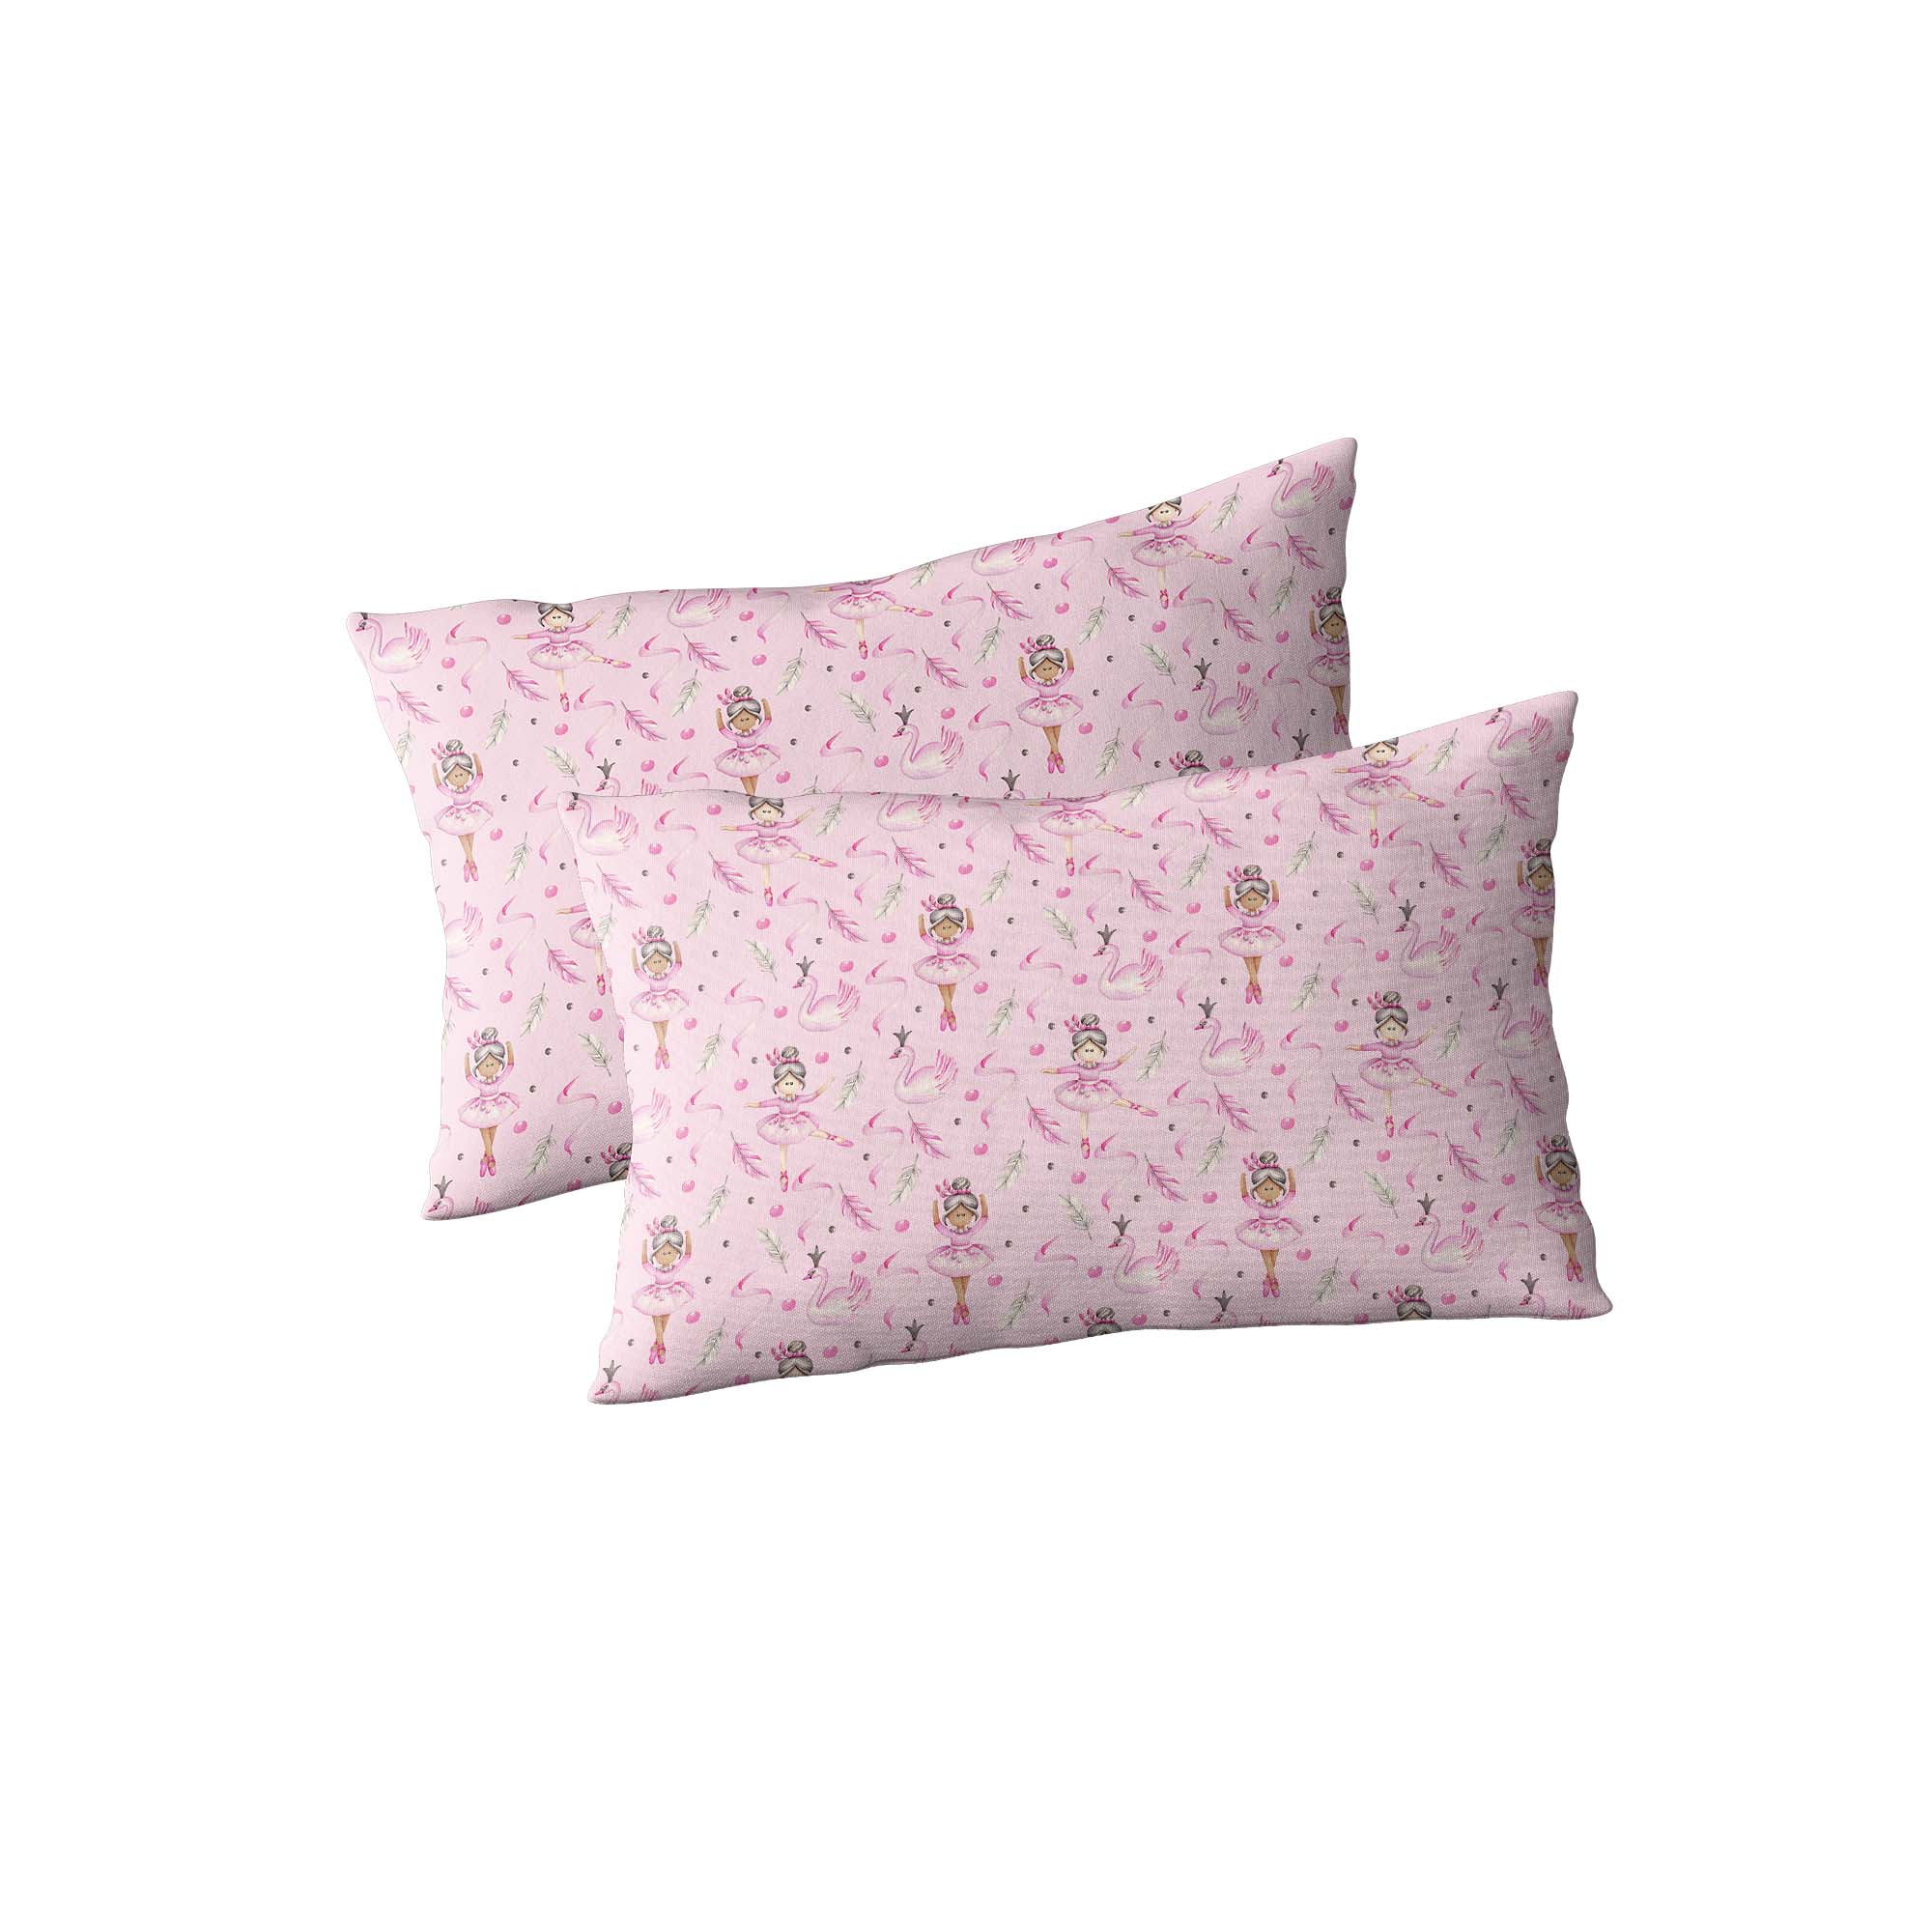 Olivia Pillow Cases (Set of 2)